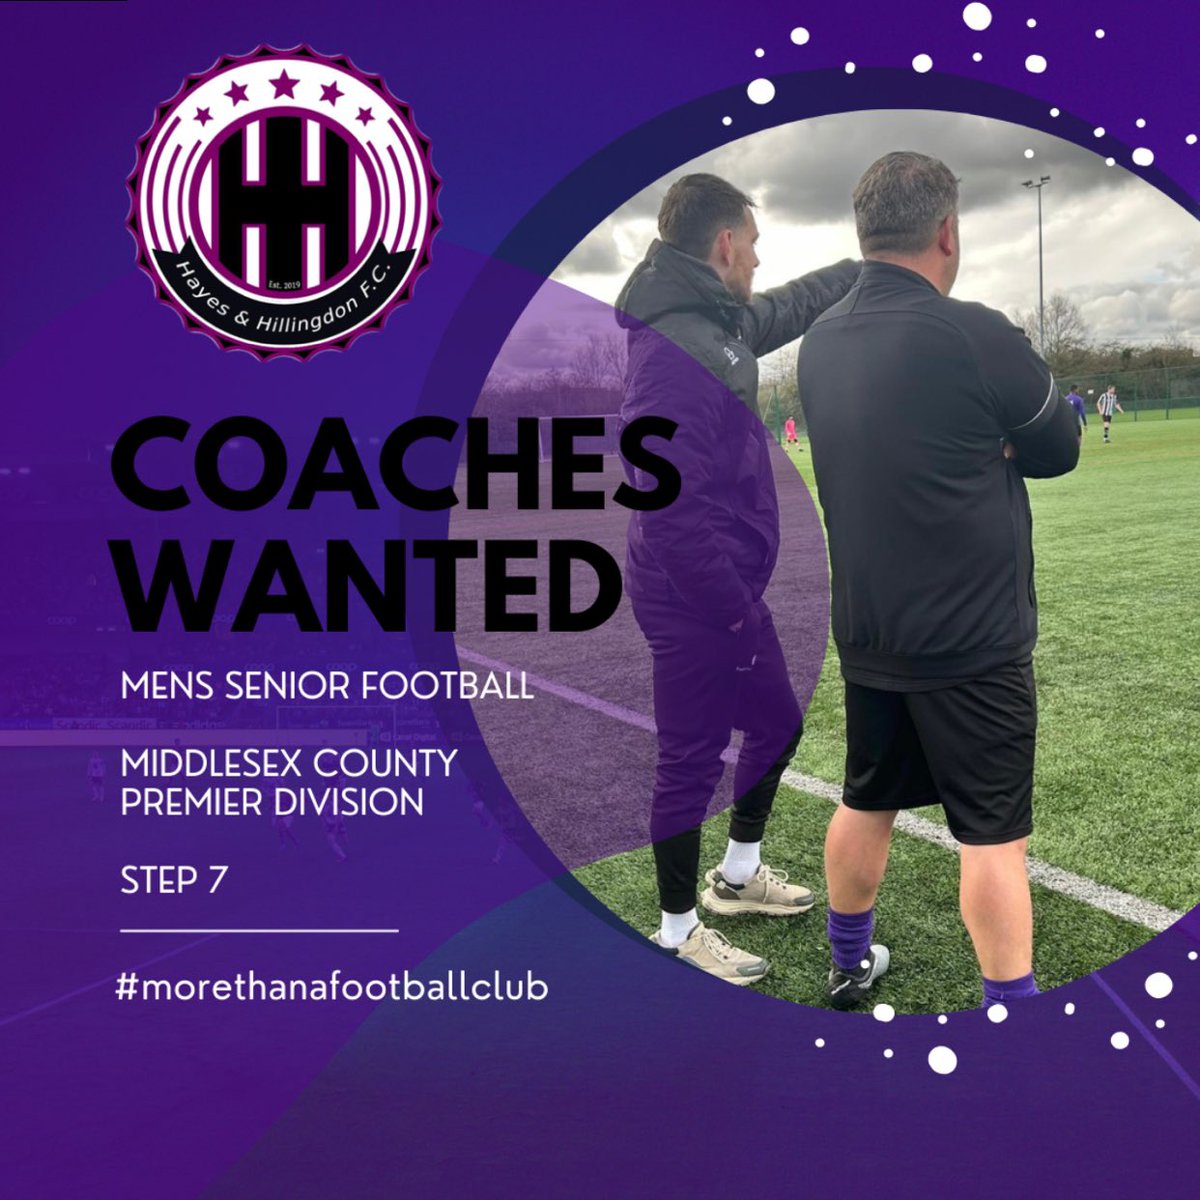 🚨We’re looking for coaches to join us on our journey at HHFC. If you’re a coach looking for a new team then please message us for more details.. 👀👊🏼💜

#HHFC #morethanafootballclub #hayesandhillingdonfc #footballcoach #football #club #middlesexcounty #middxfa #MCPD 

💜🖤